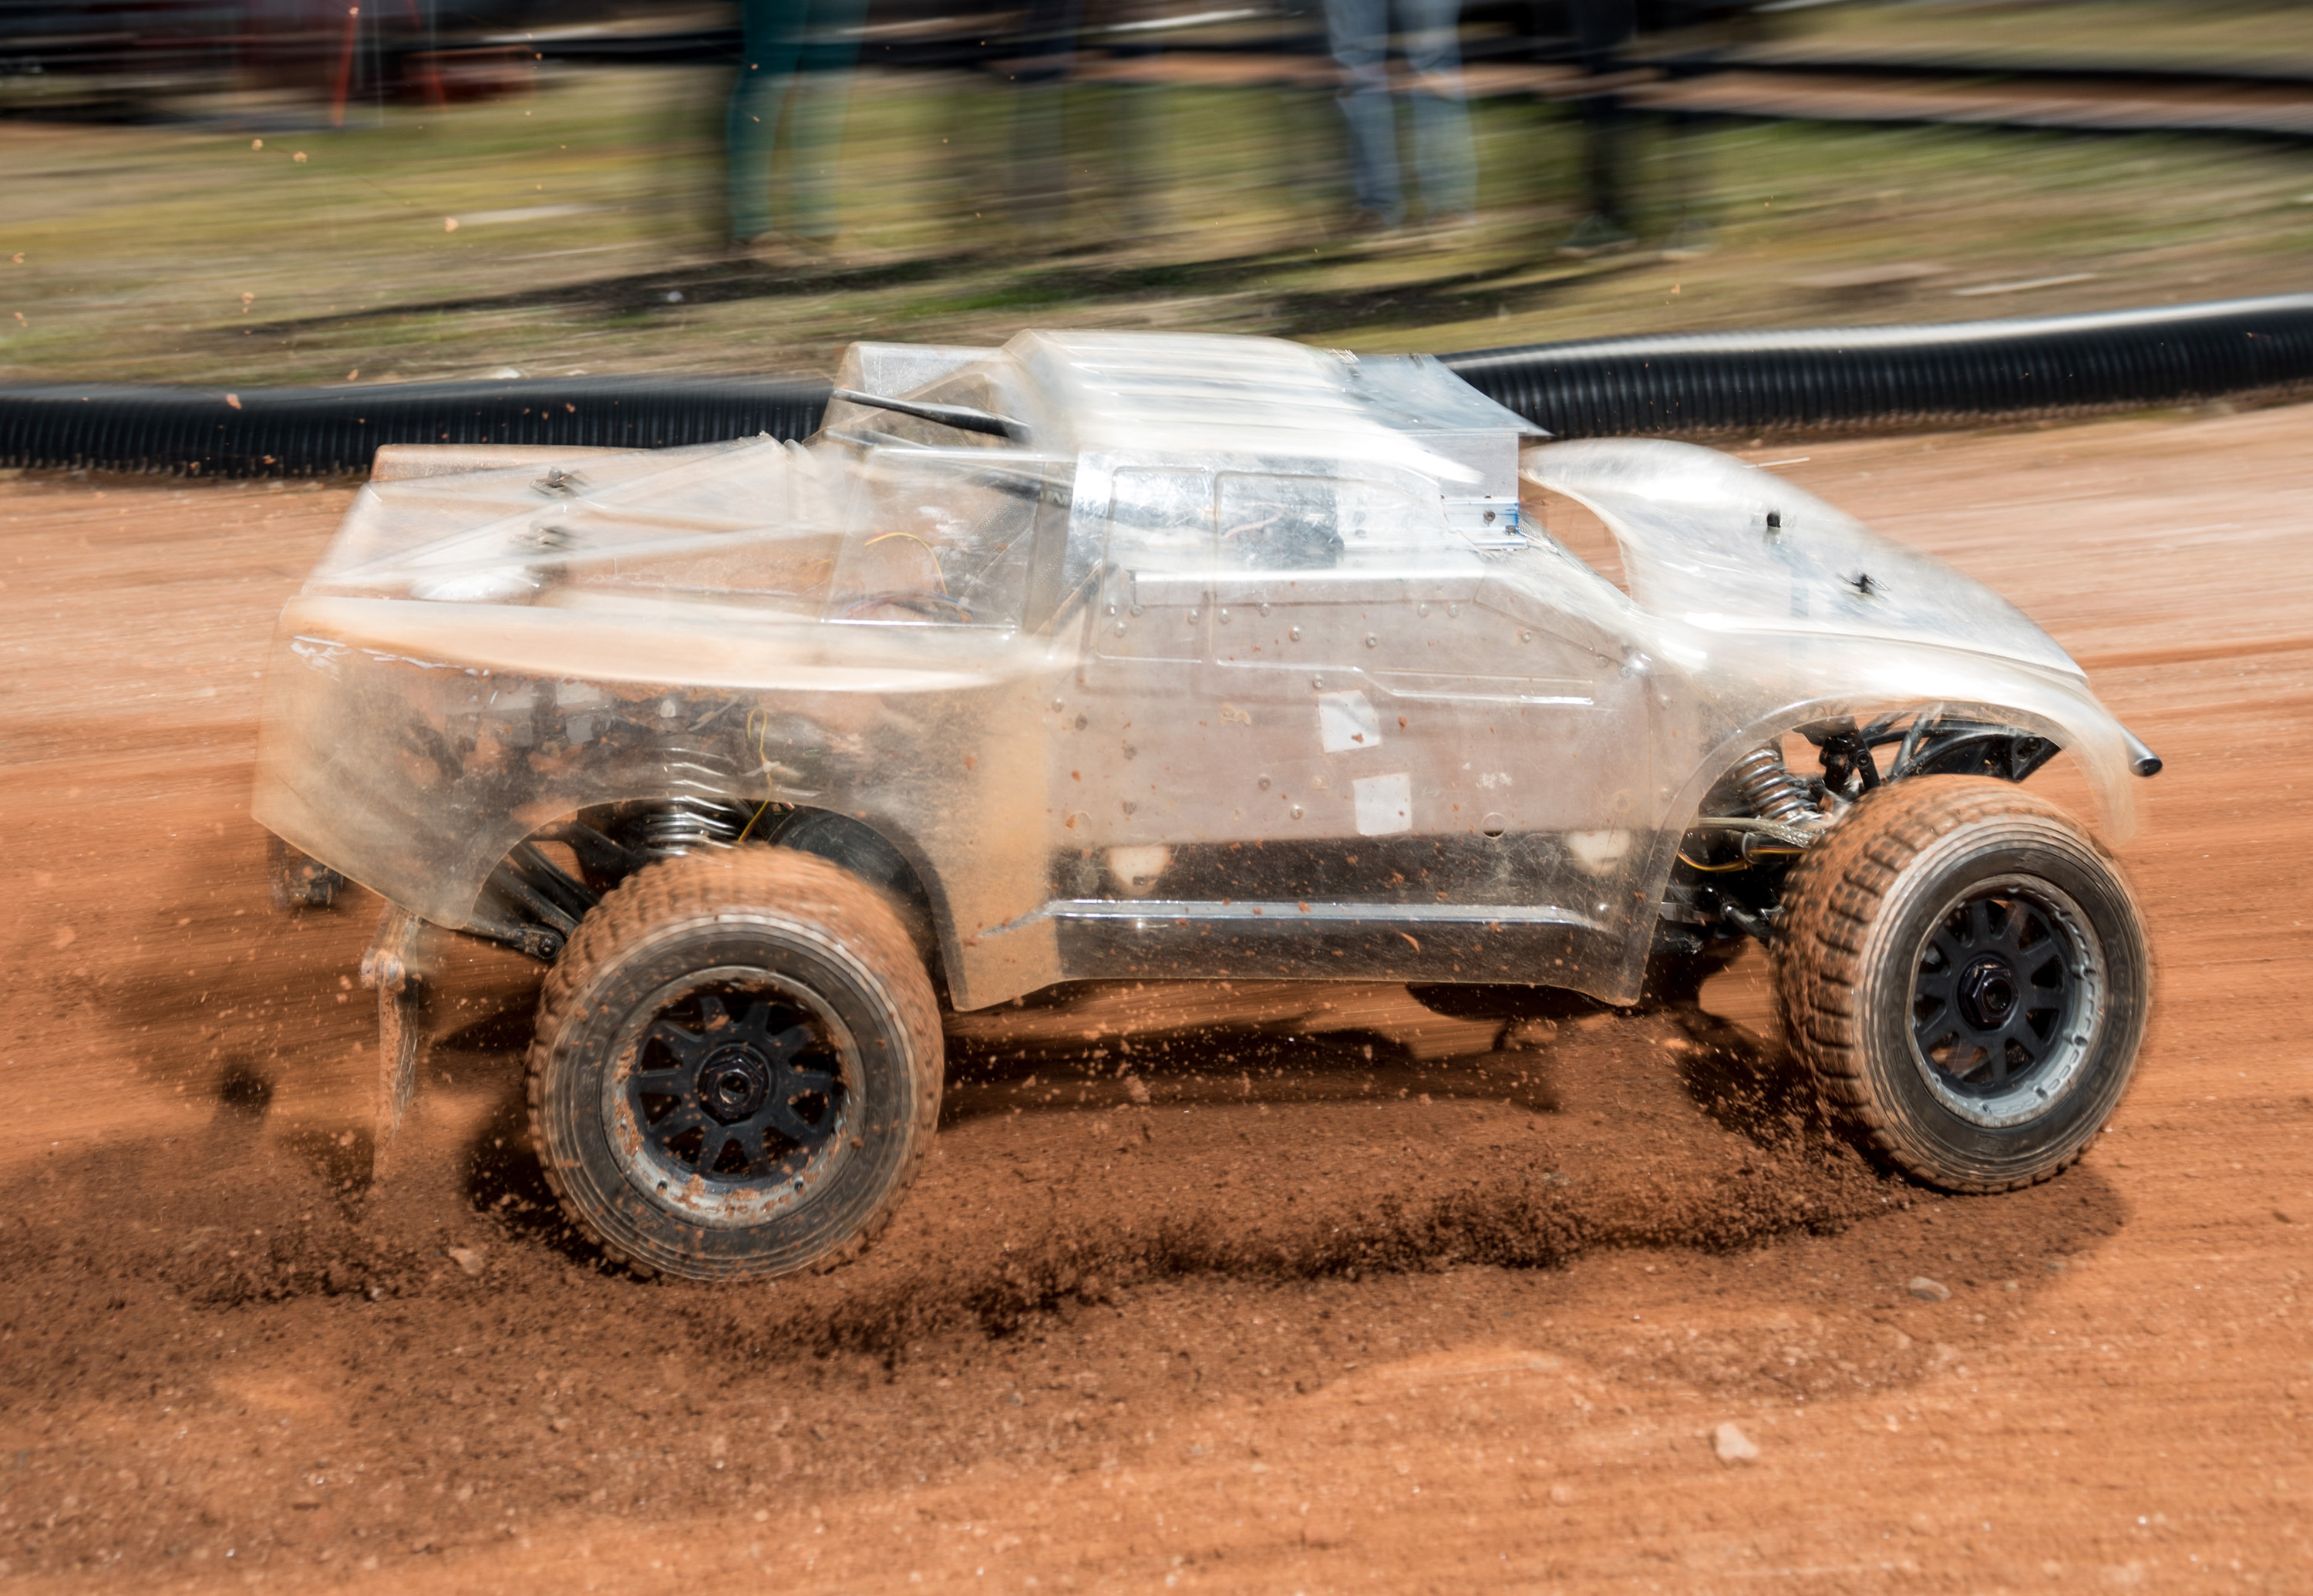 At the Georgia Tech Autonomous Racing Facility, researchers are studying a one-fifth-scale autonomous vehicle as it traverses a dirt track. The work will help the engineers understand how to help driverless vehicles face the risky and unusual road conditions of the real world. (Credit: Rob Felt, Georgia Tech)